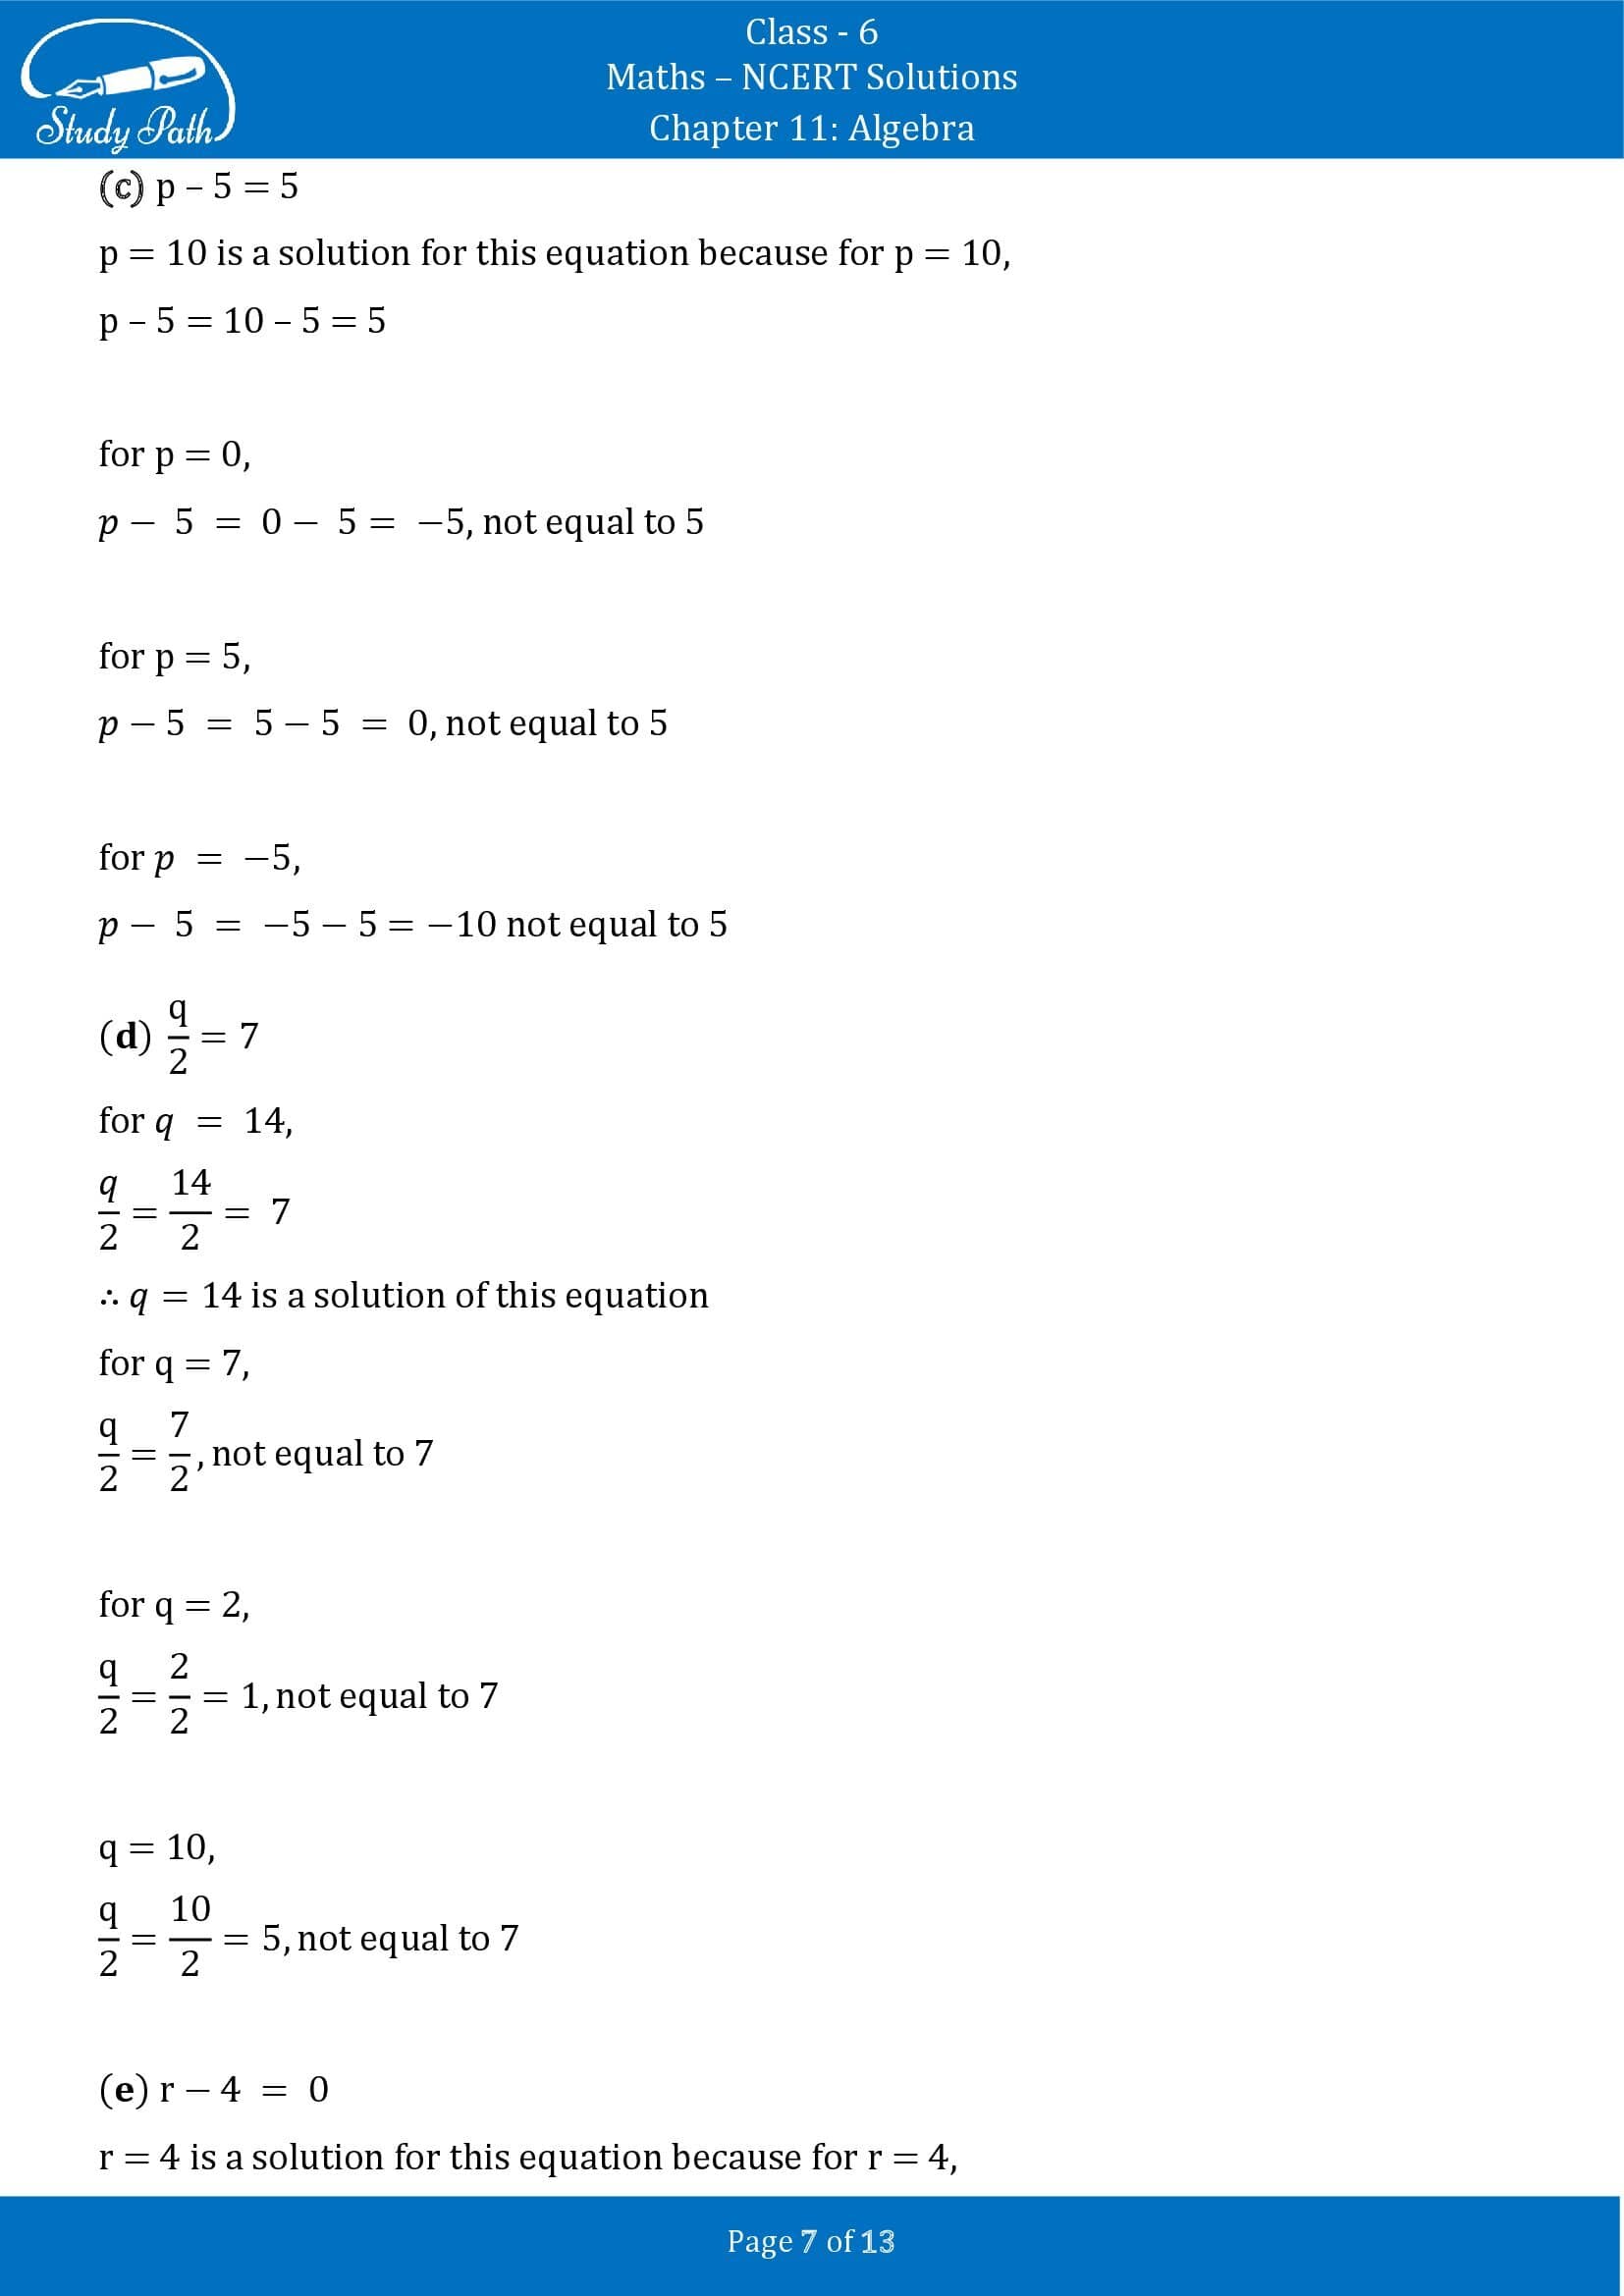 NCERT Solutions for Class 6 Maths Chapter 11 Algebra Exercise 11.5 00007